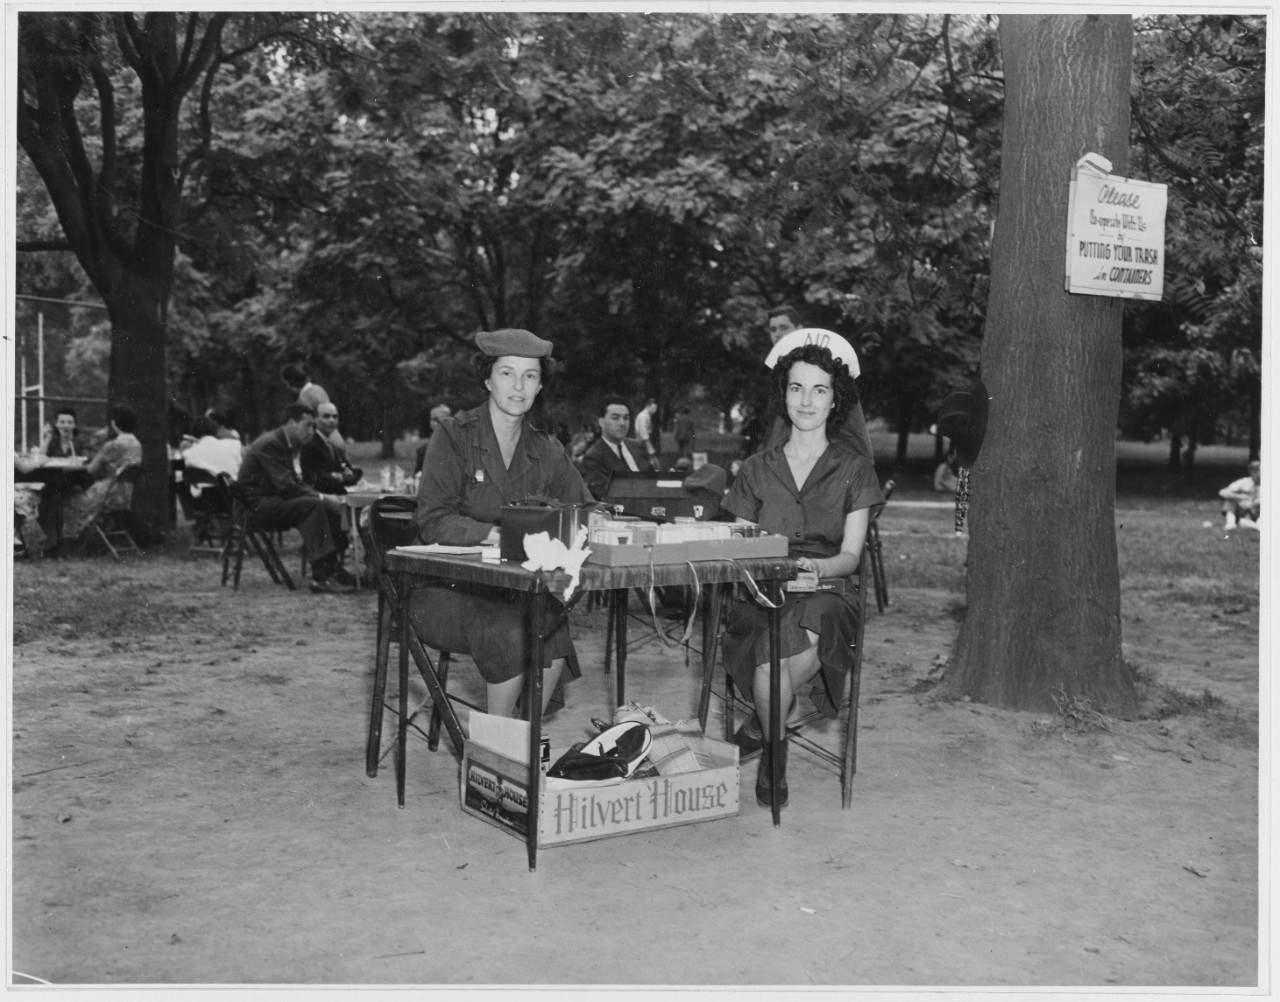 Women selling cigarettes at outdoor cafeteria, Washington, DC